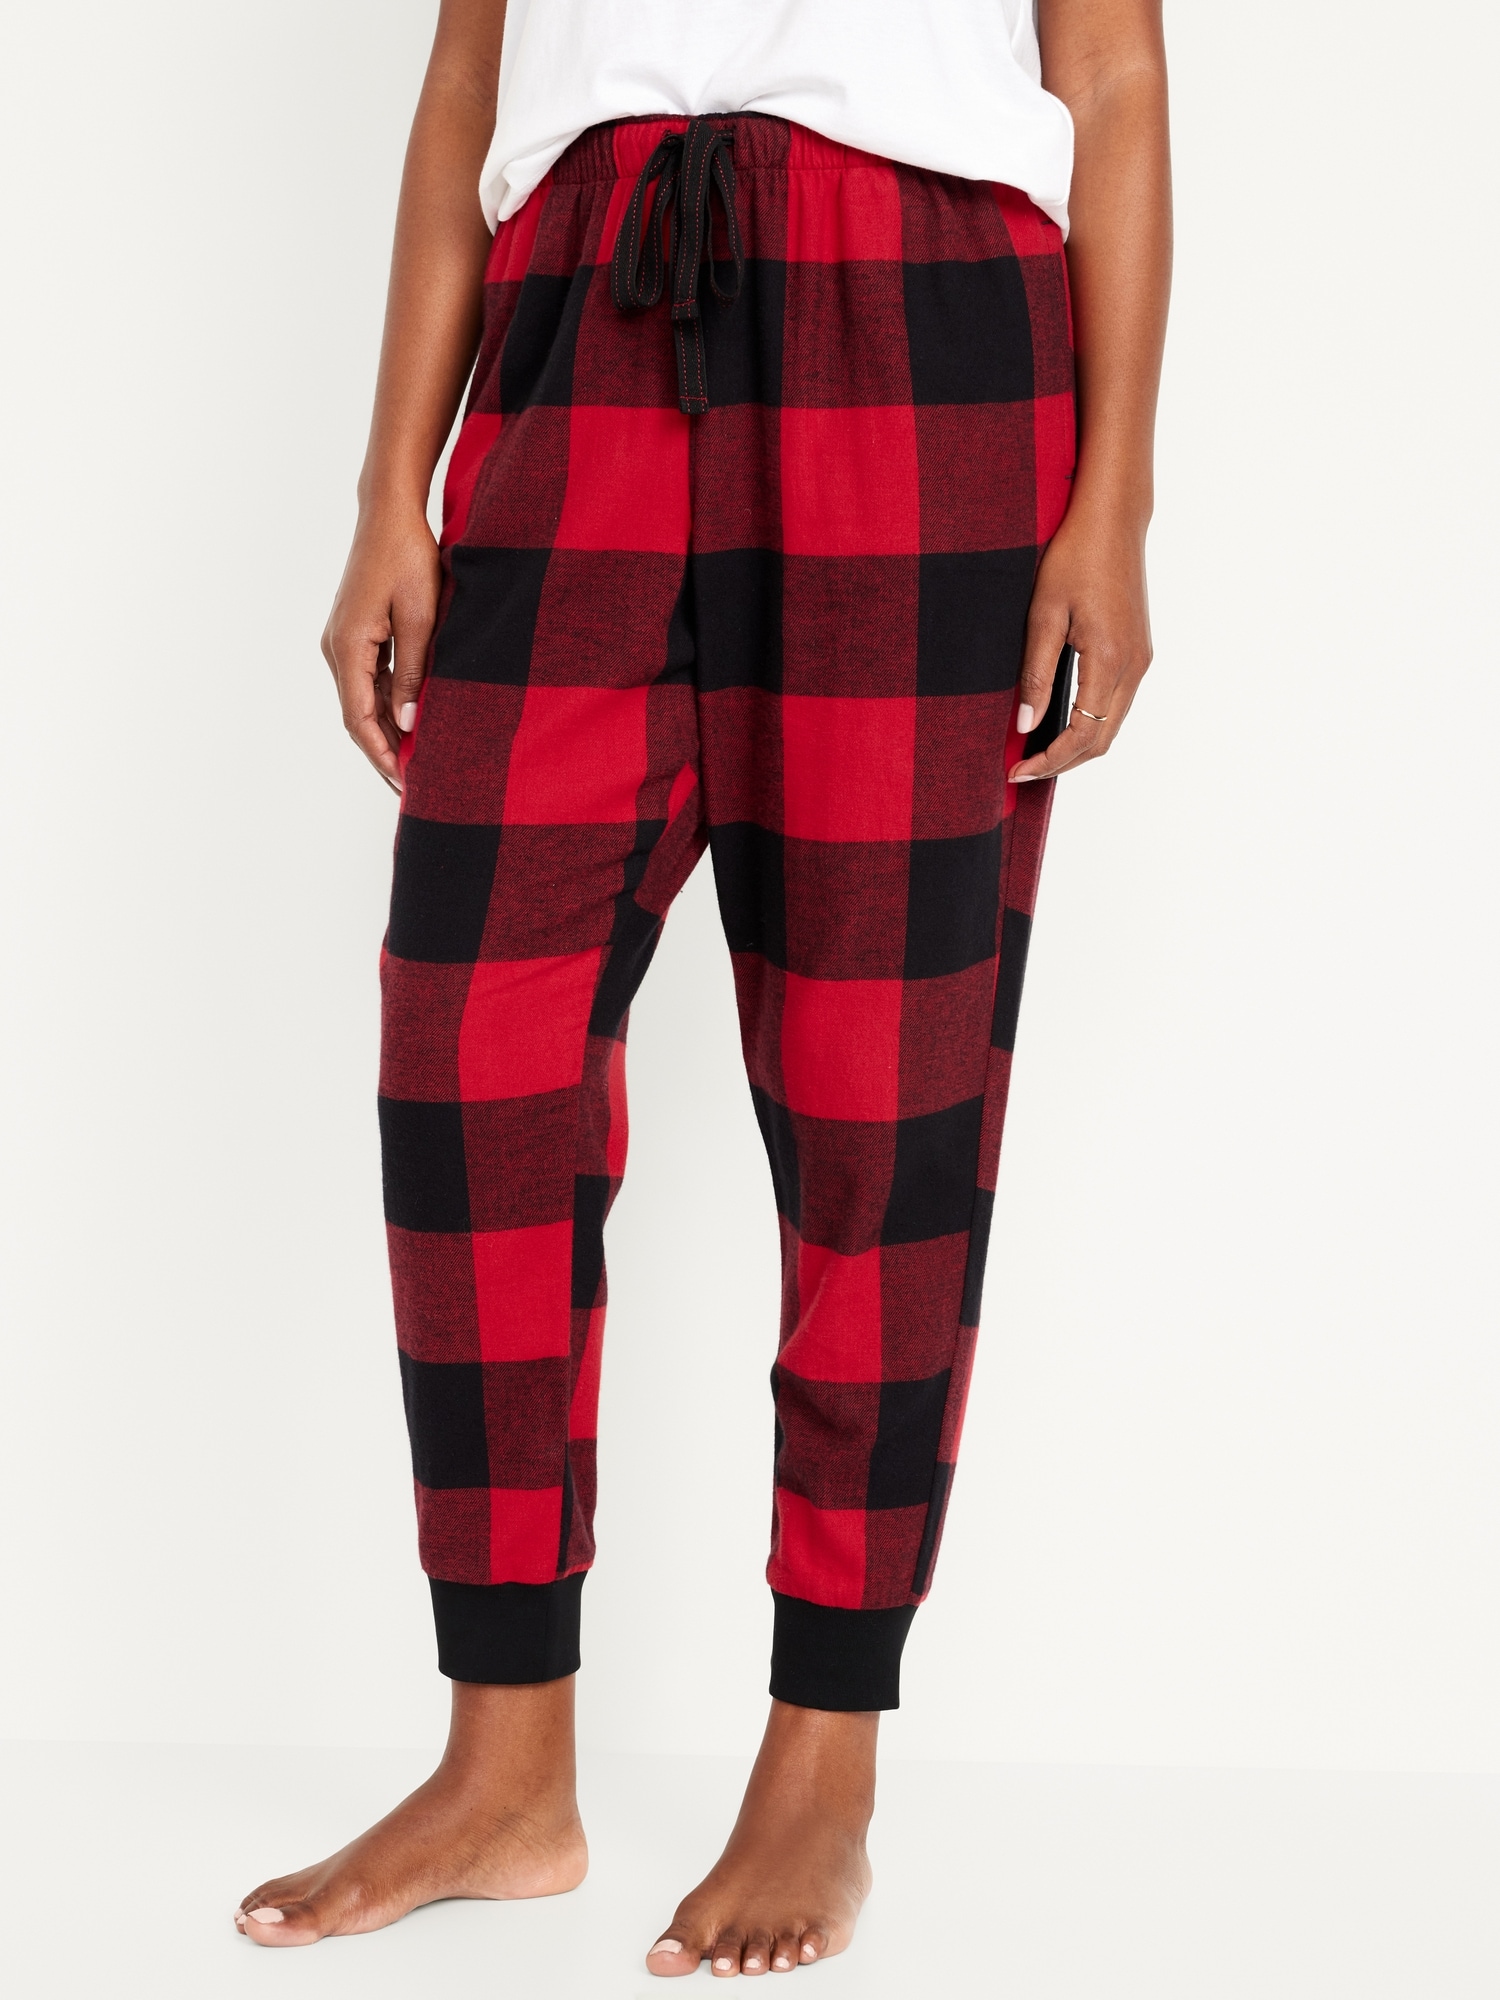 Buffalo Plaid Check Scotland Pink Lightweight Pajama Pants For Women Ladies  Night Pants Wear for Adults X-Small at  Women's Clothing store